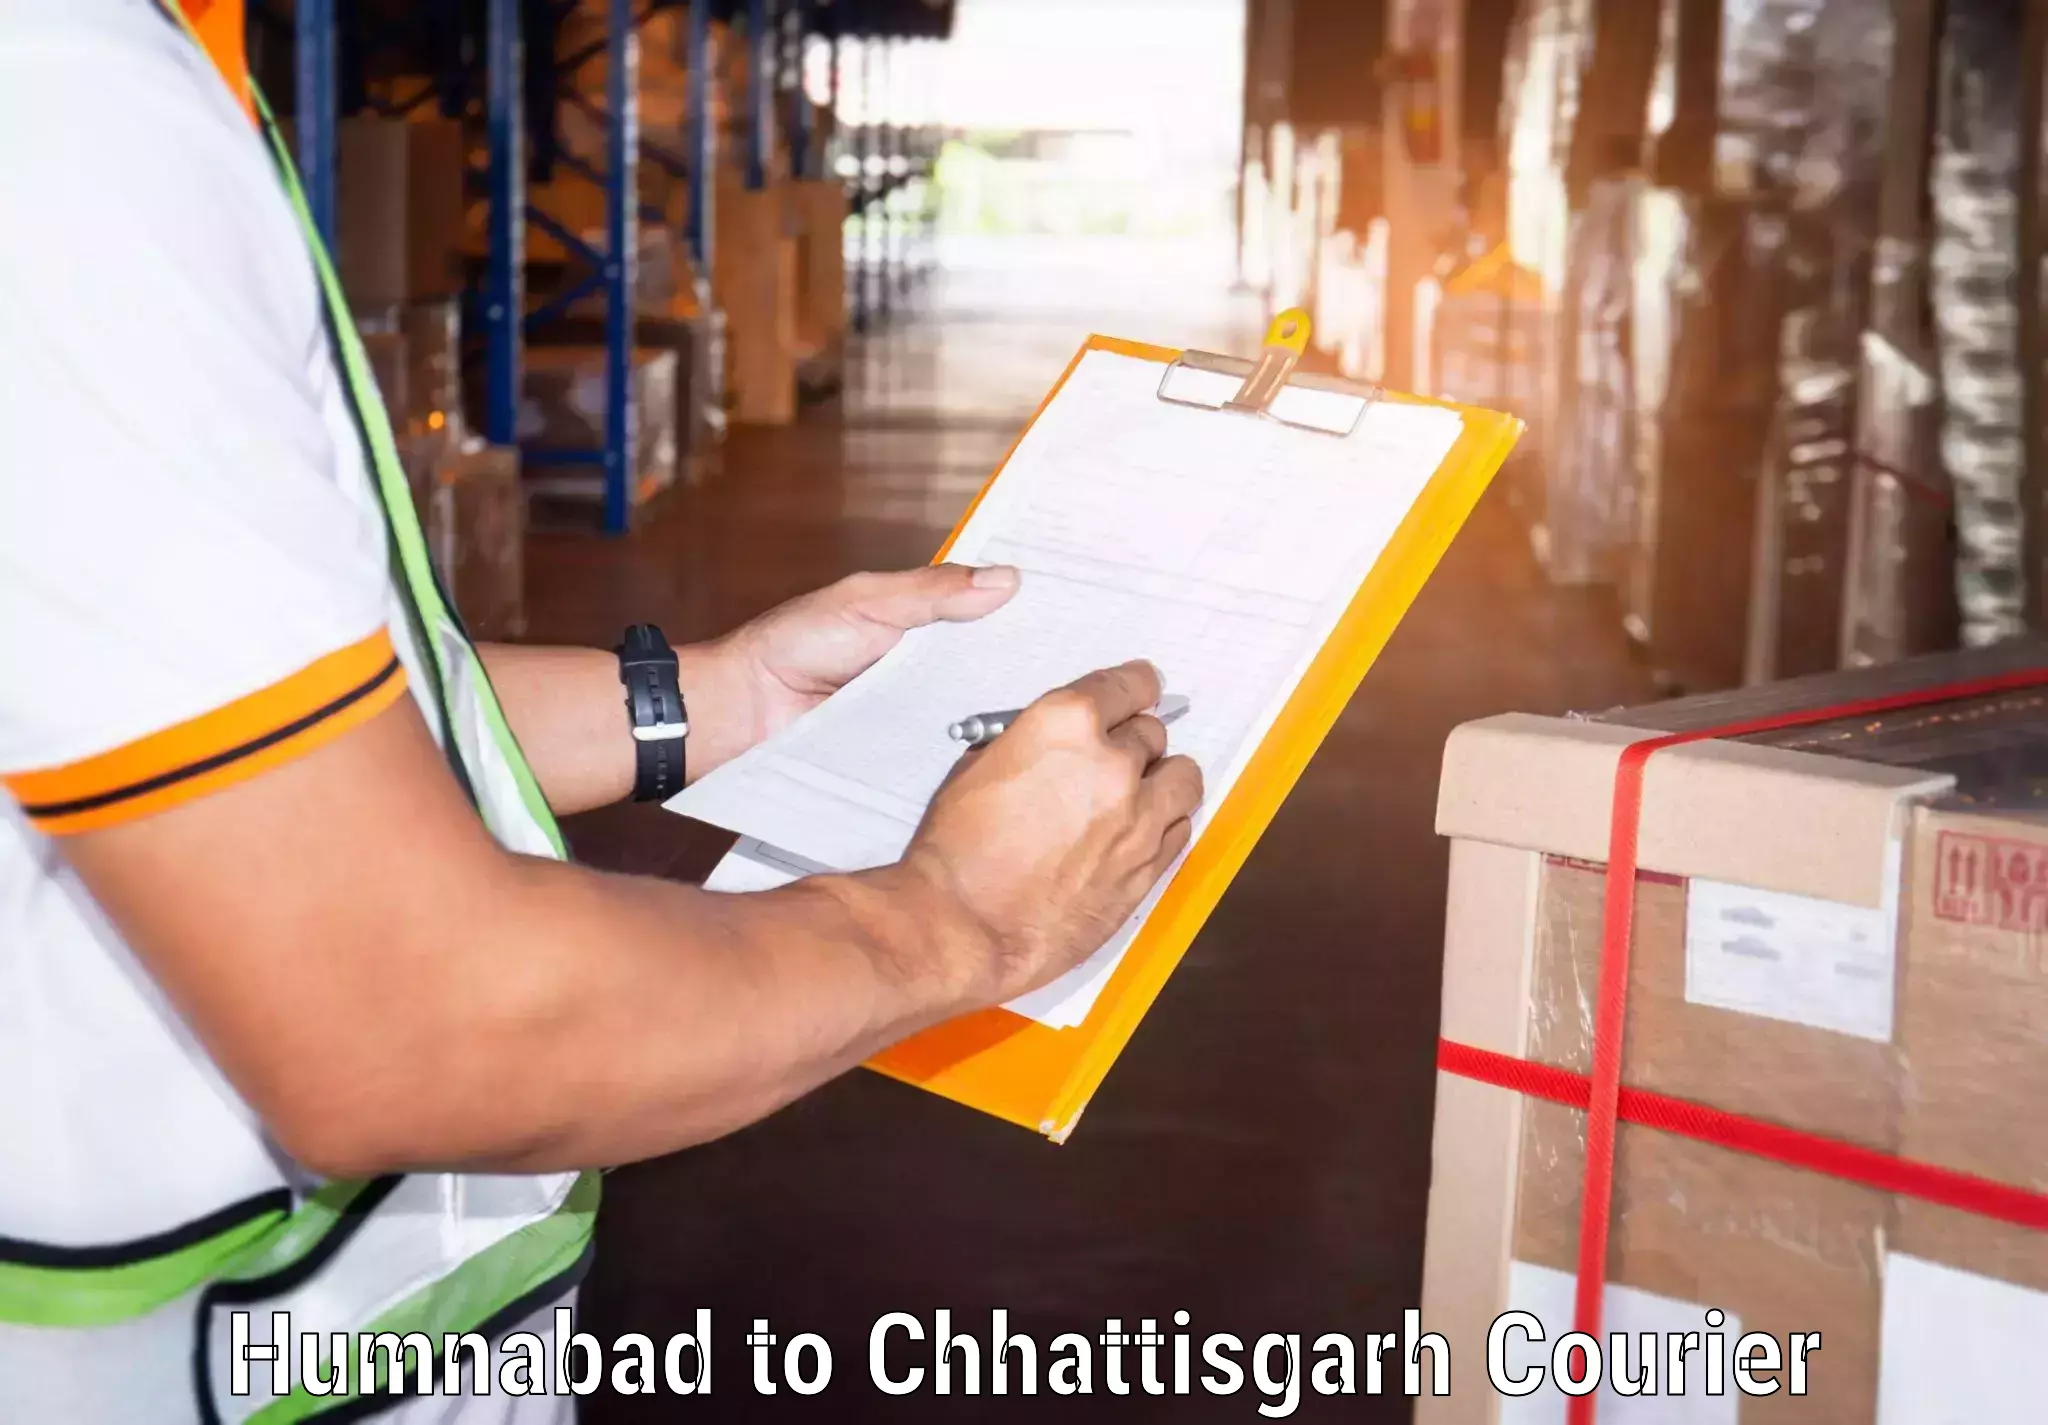 Diverse delivery methods in Humnabad to Raigarh Chhattisgarh